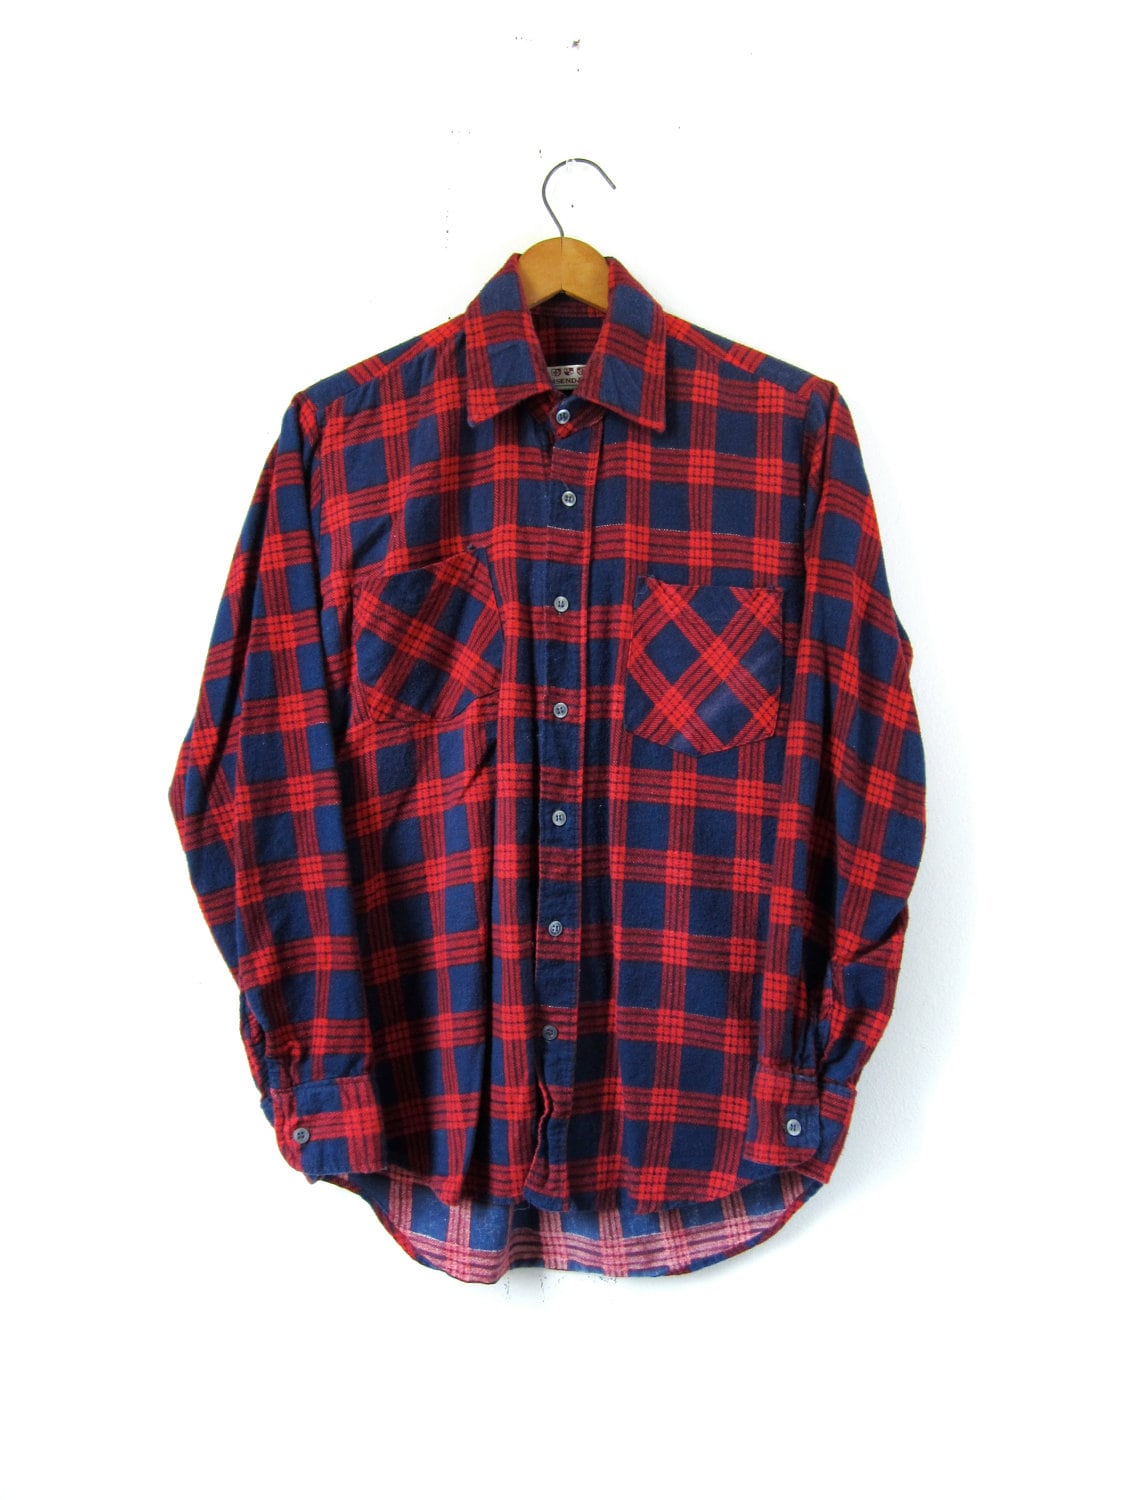 90s Grunge Flannel Shirt Red Mens Small / Womens by MemoryVintage